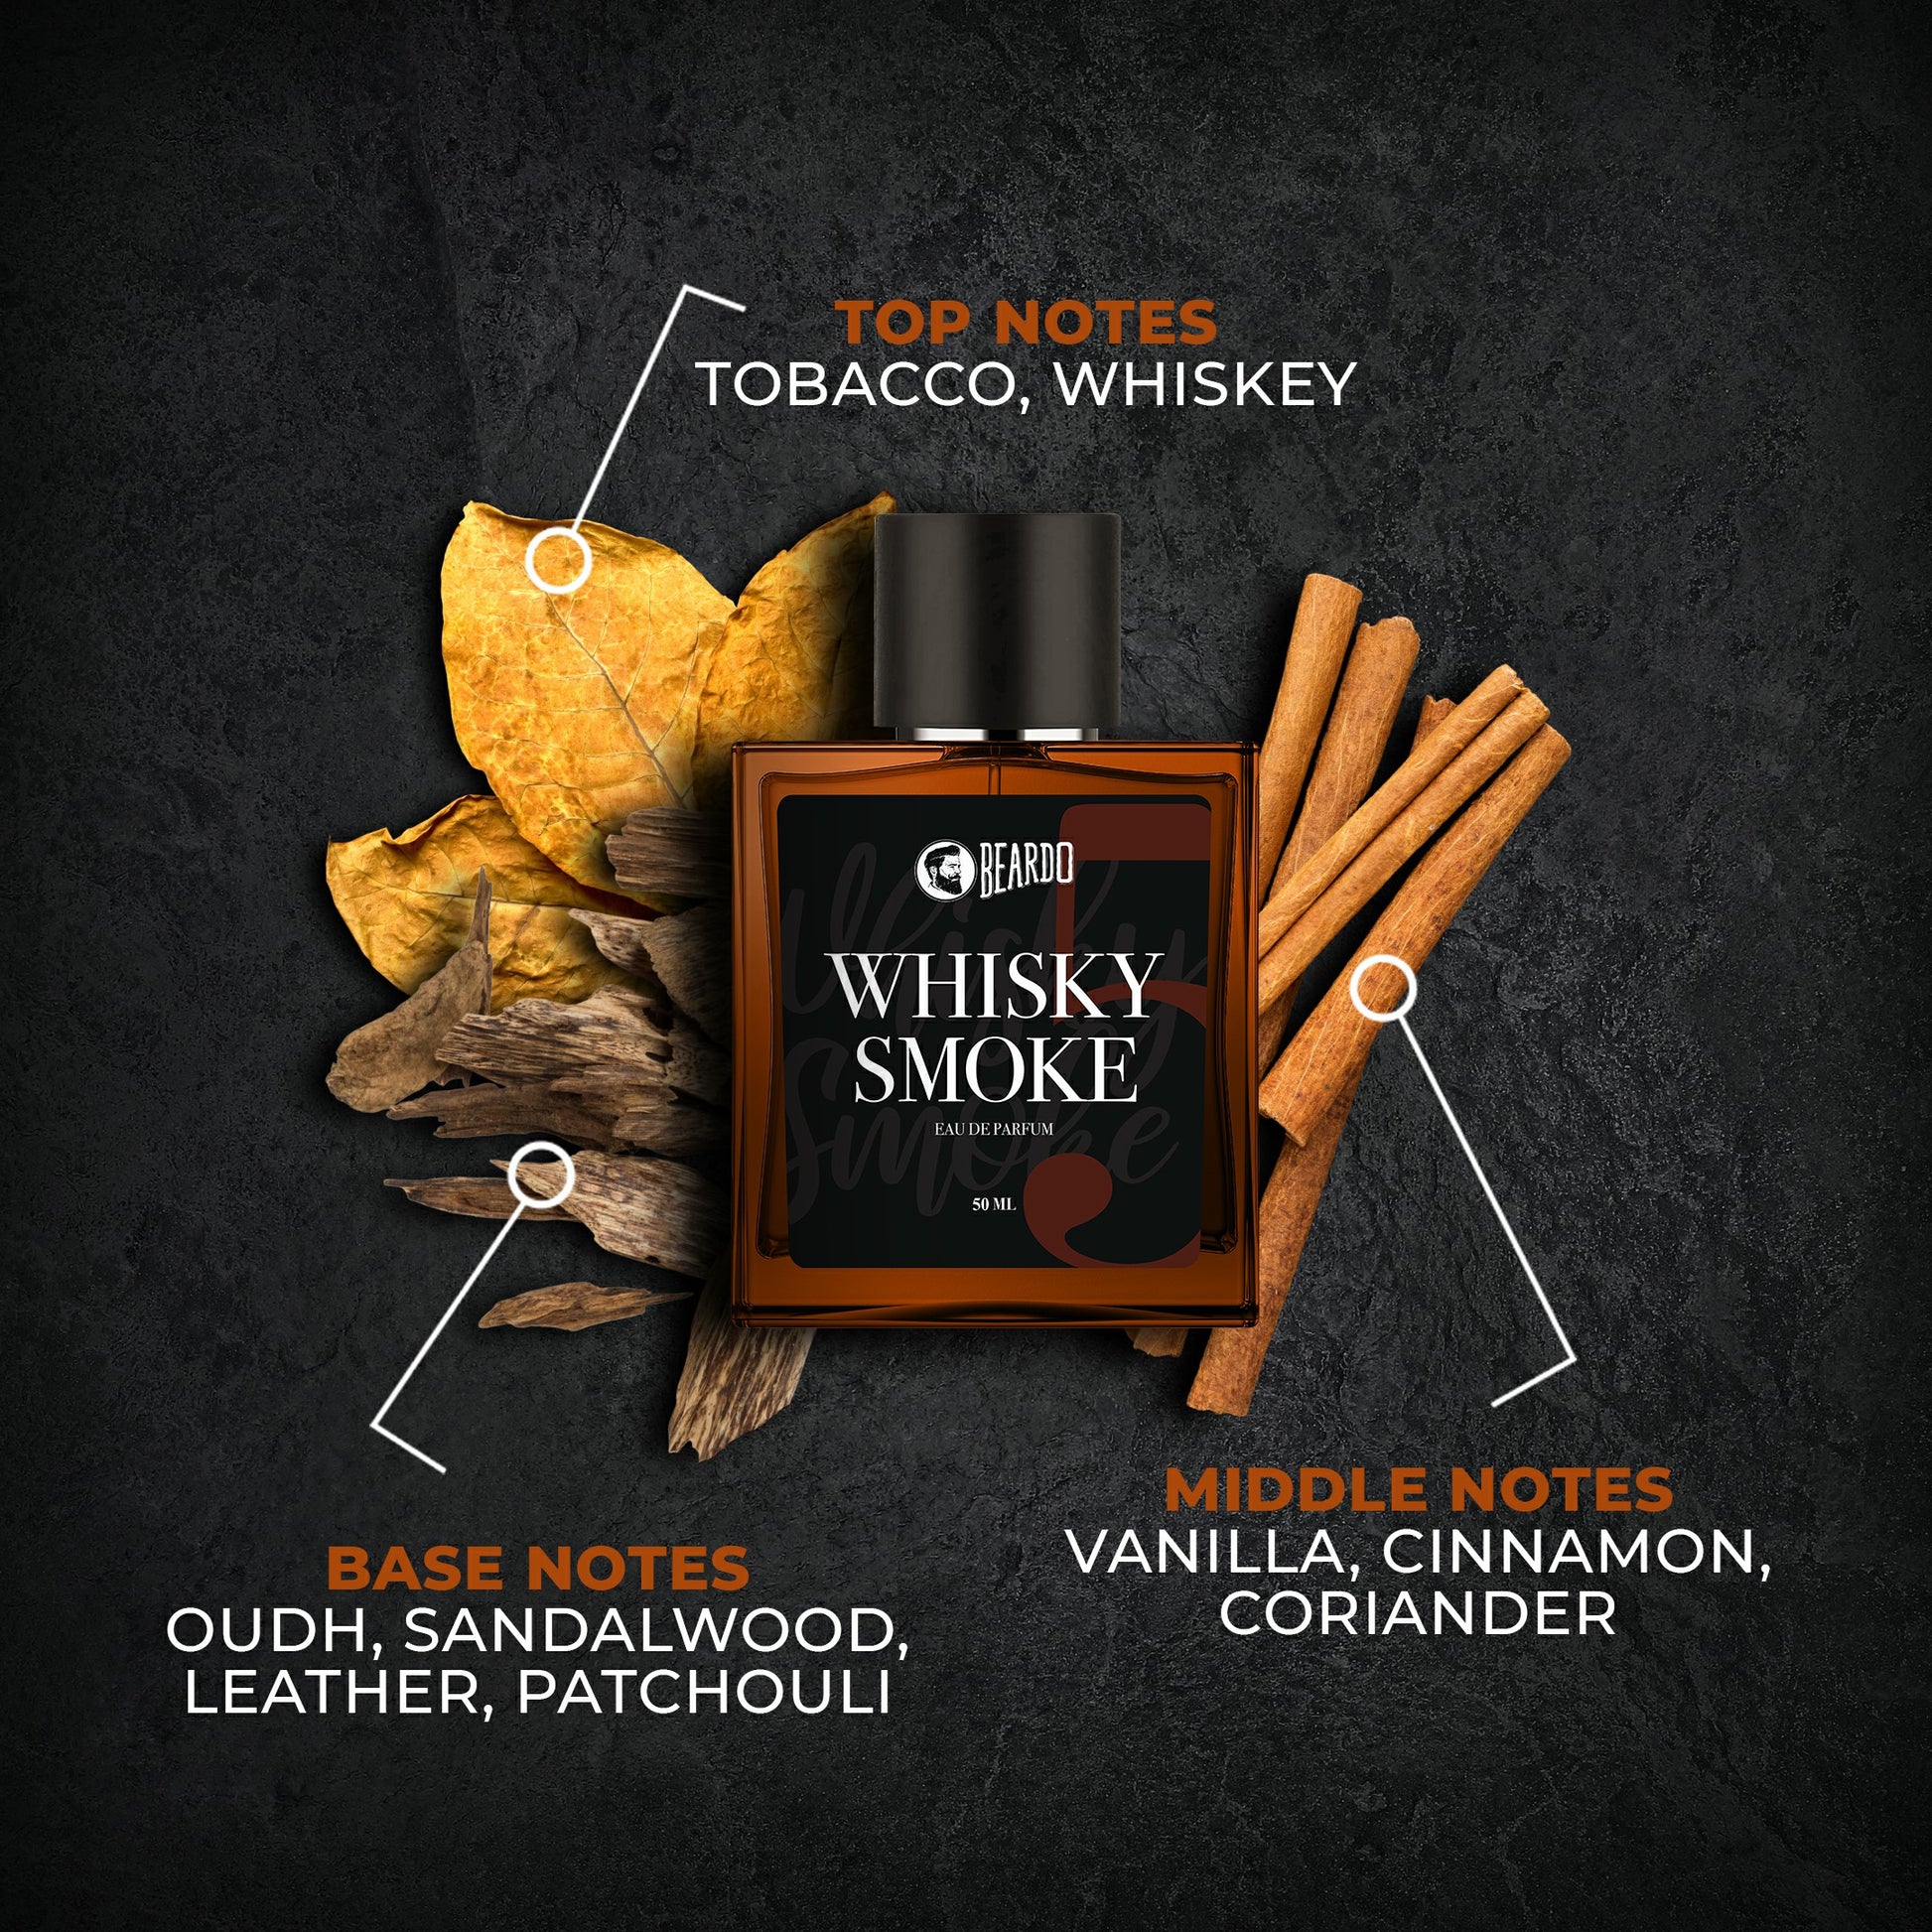 top notes, tobacco, whiskey, base notes, oudh, leather, middle notes, cinnamon, corriander